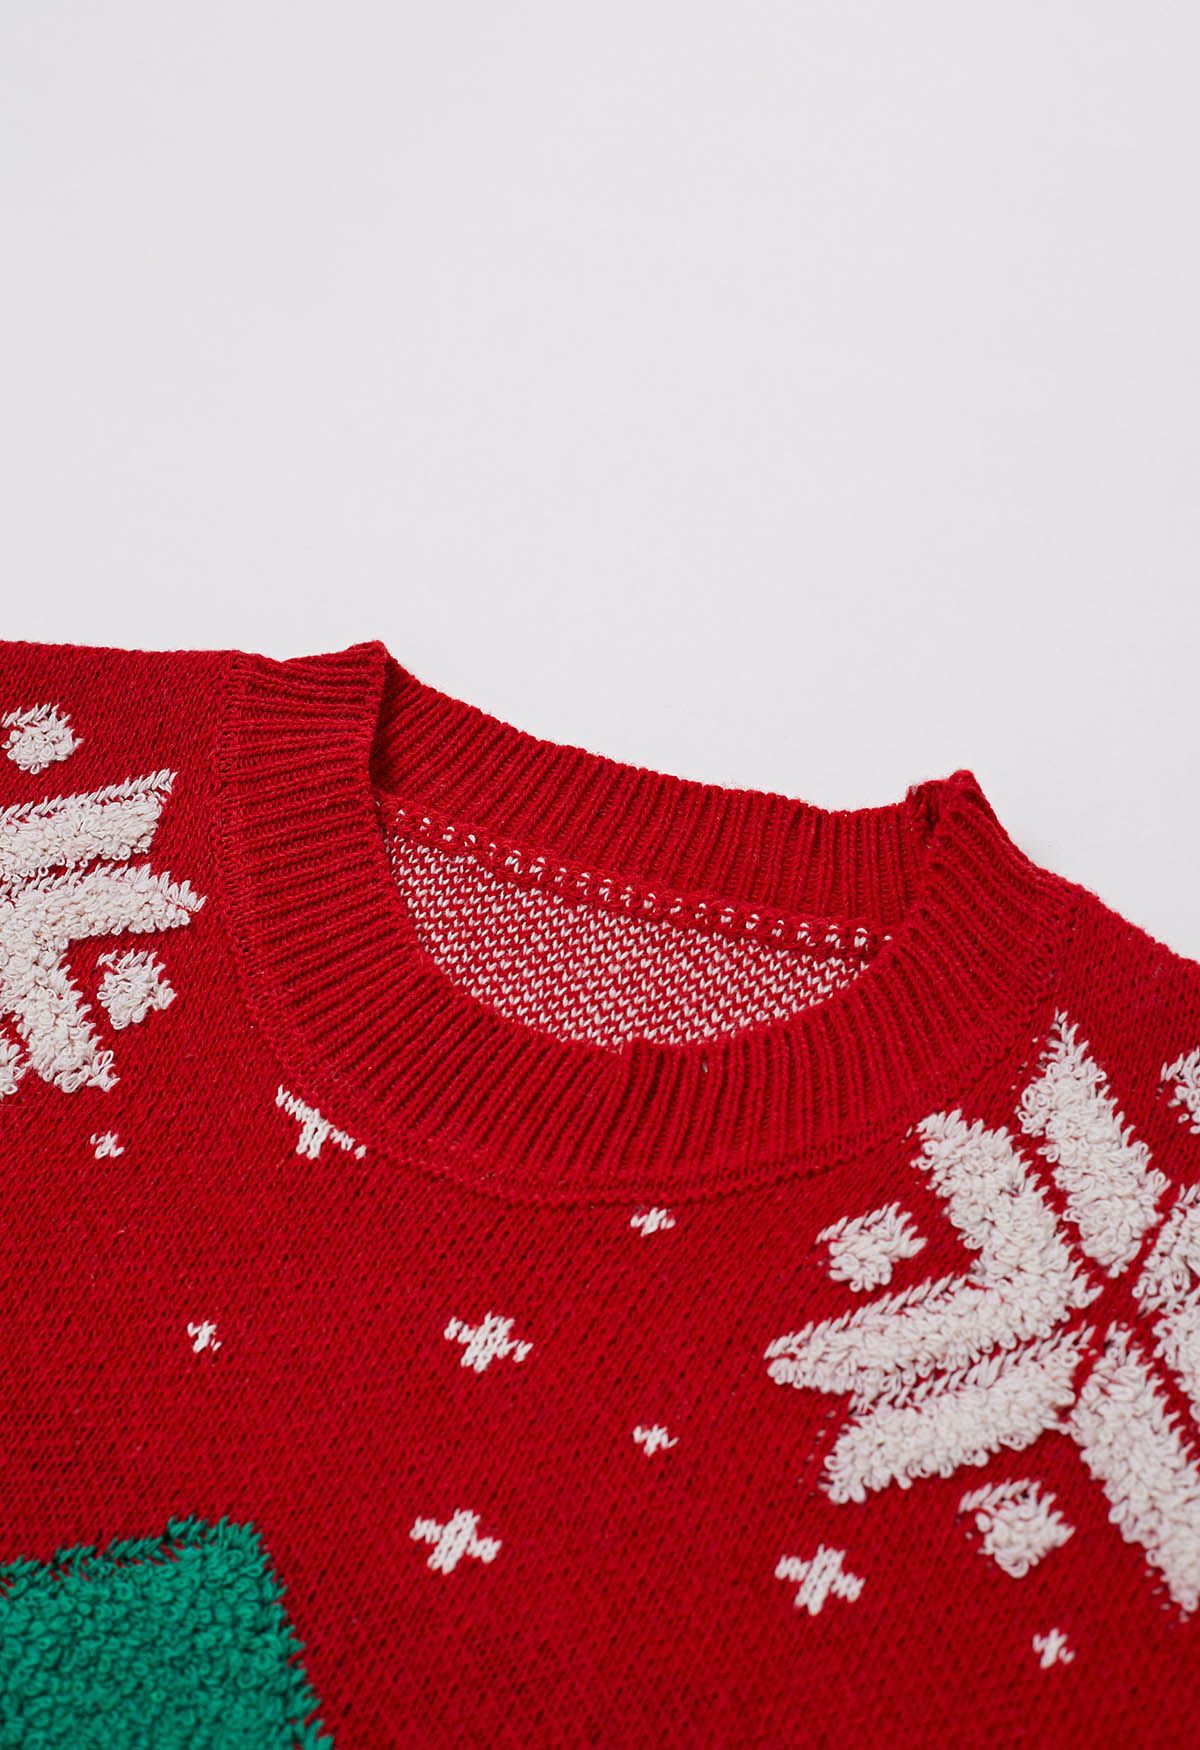 Christmas Tree and Snowflake Jacquard Knit Sweater in Red